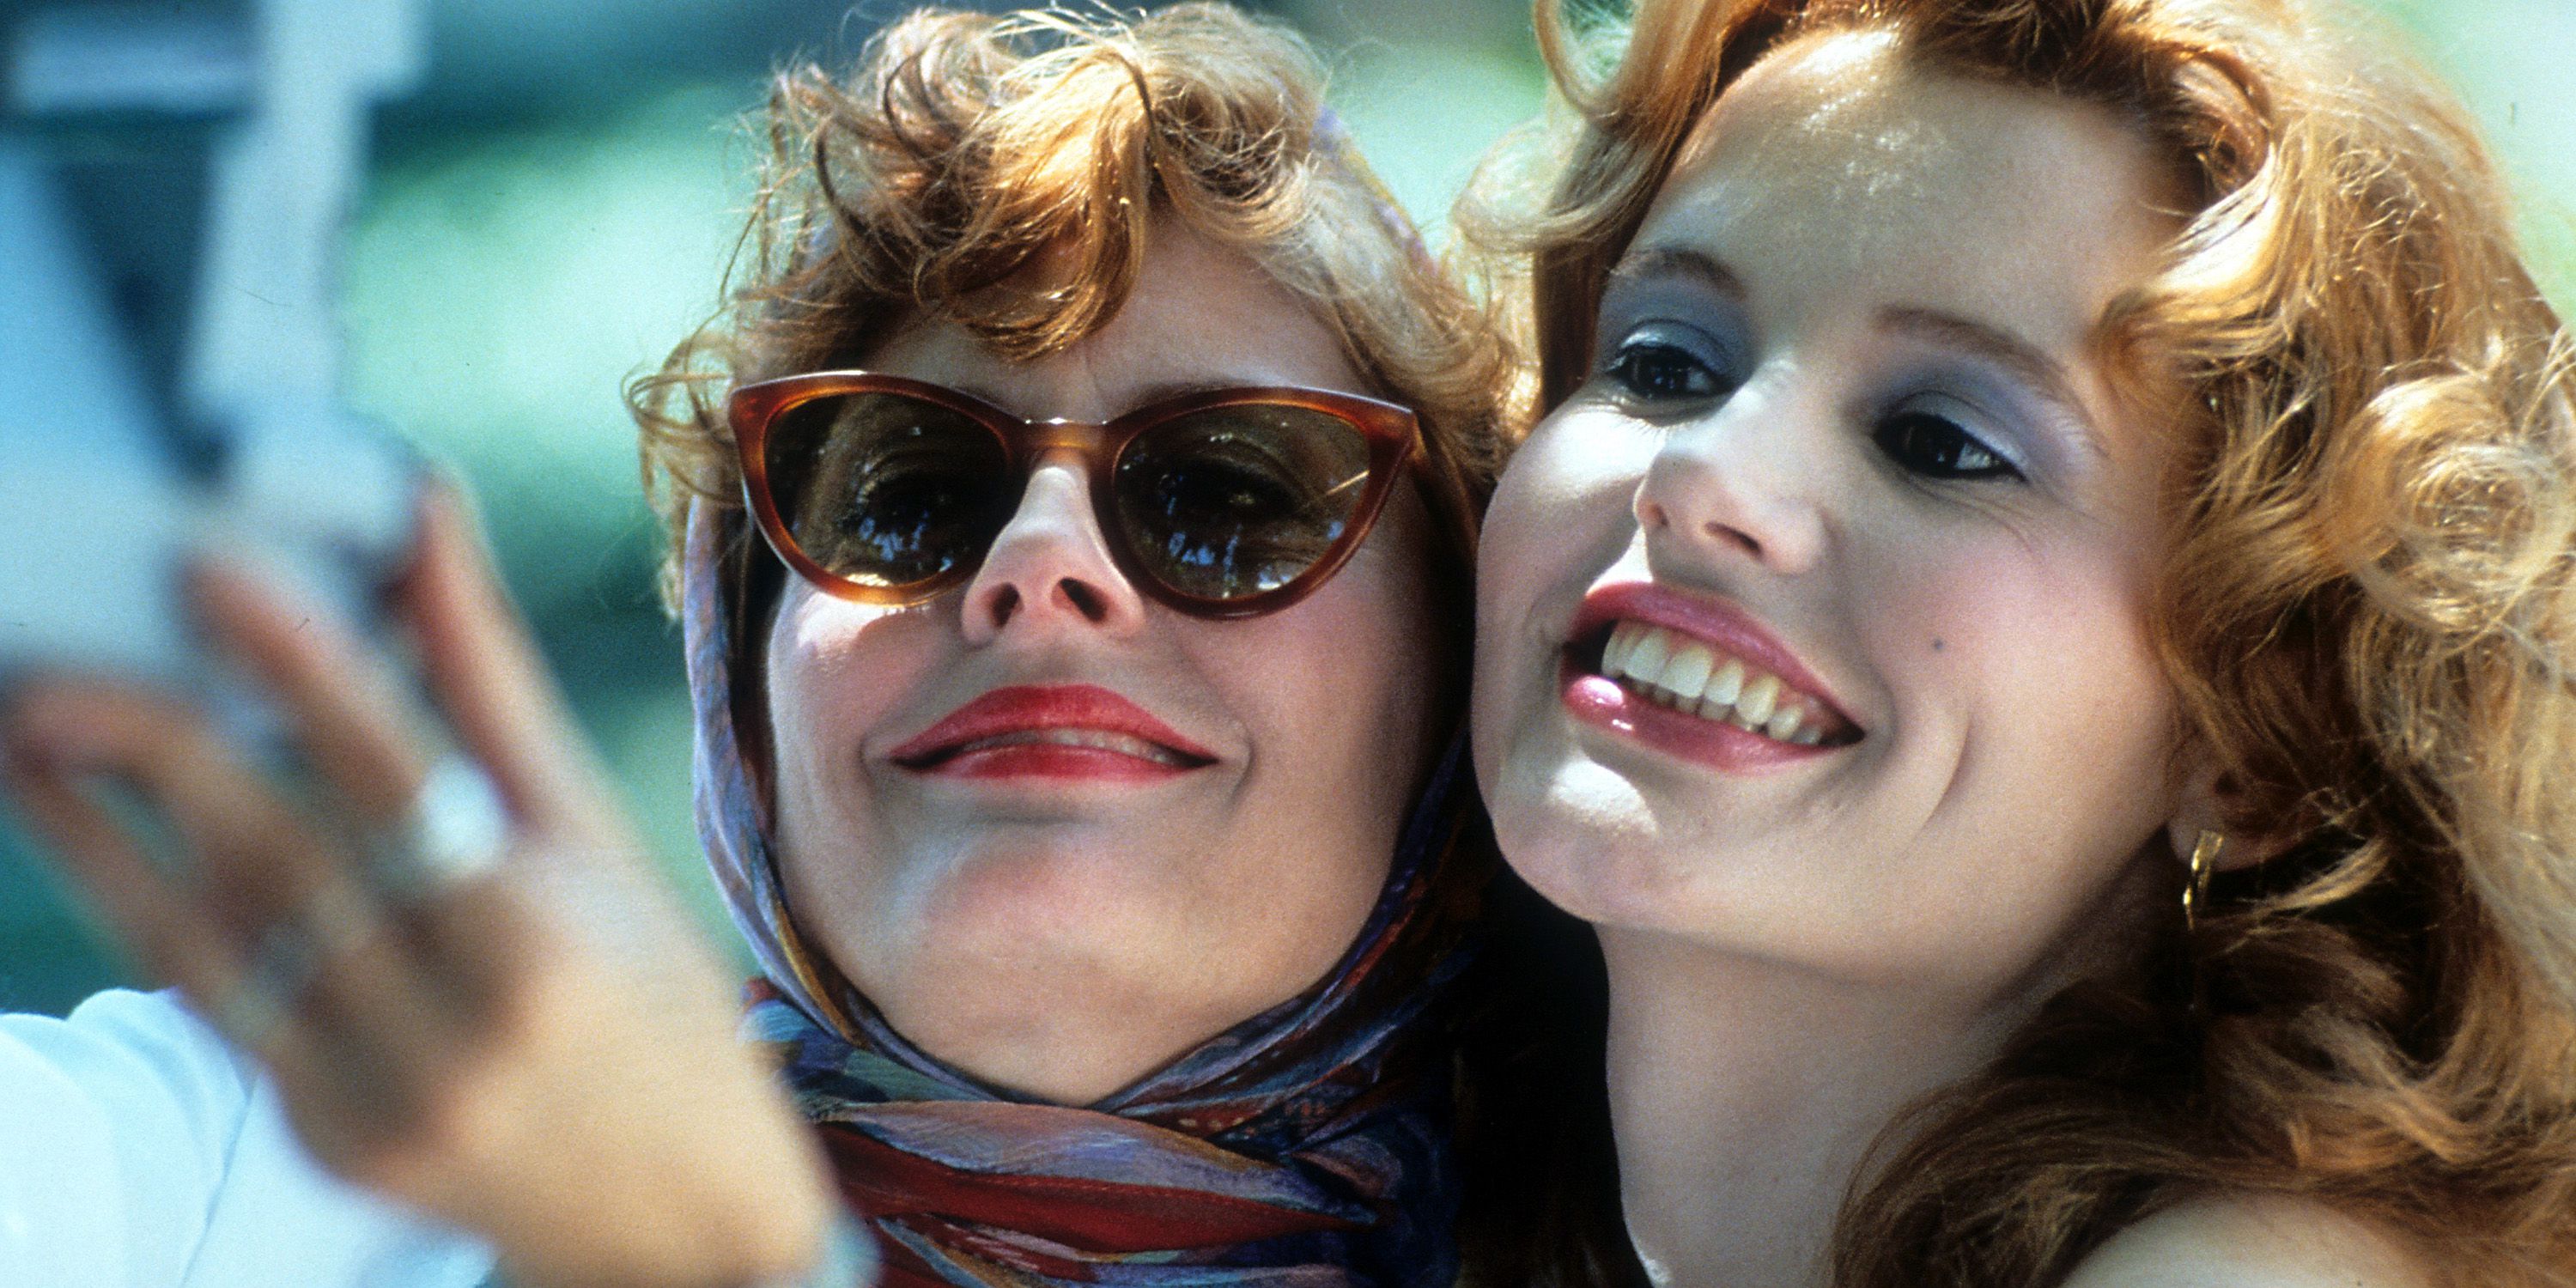 Susan Sarandon and Geena Davis in a still from Thelma & Louise